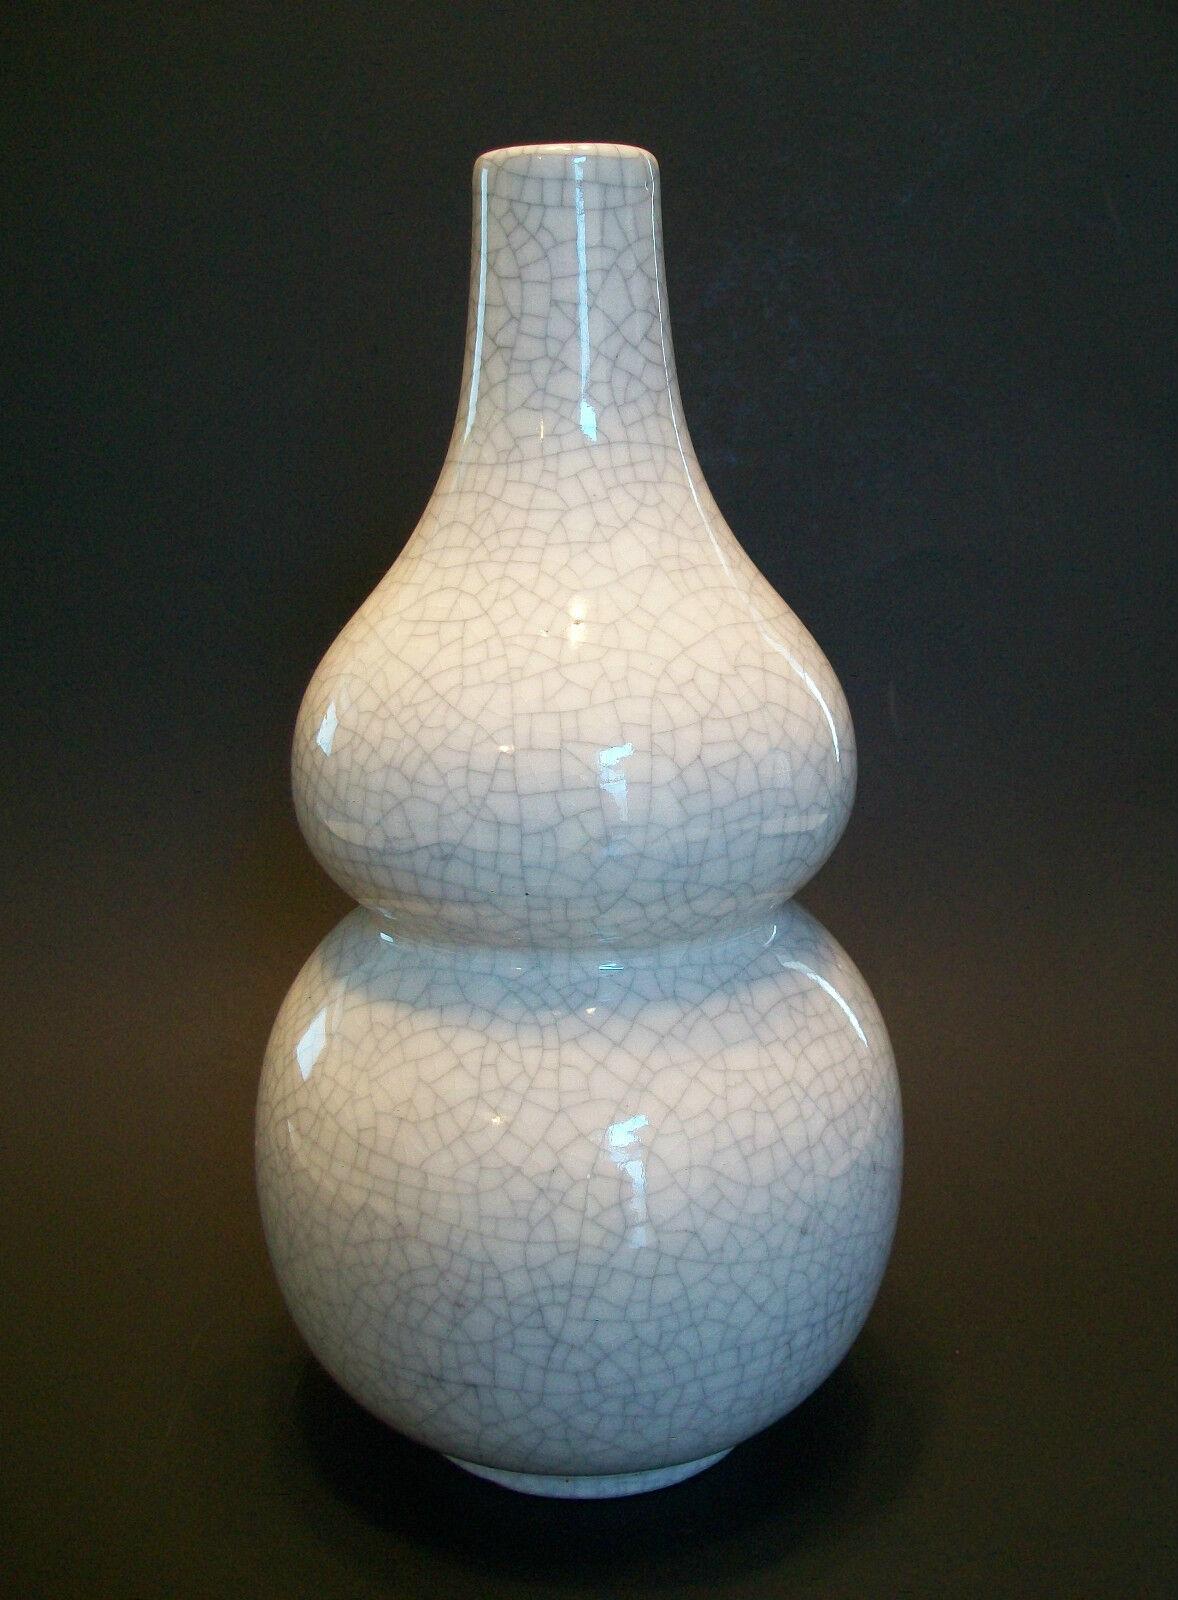 Chinoiserie Ming Style Double Gourd Crackle Glaze Ceramic Vase - Signed - Mid-20th Century For Sale